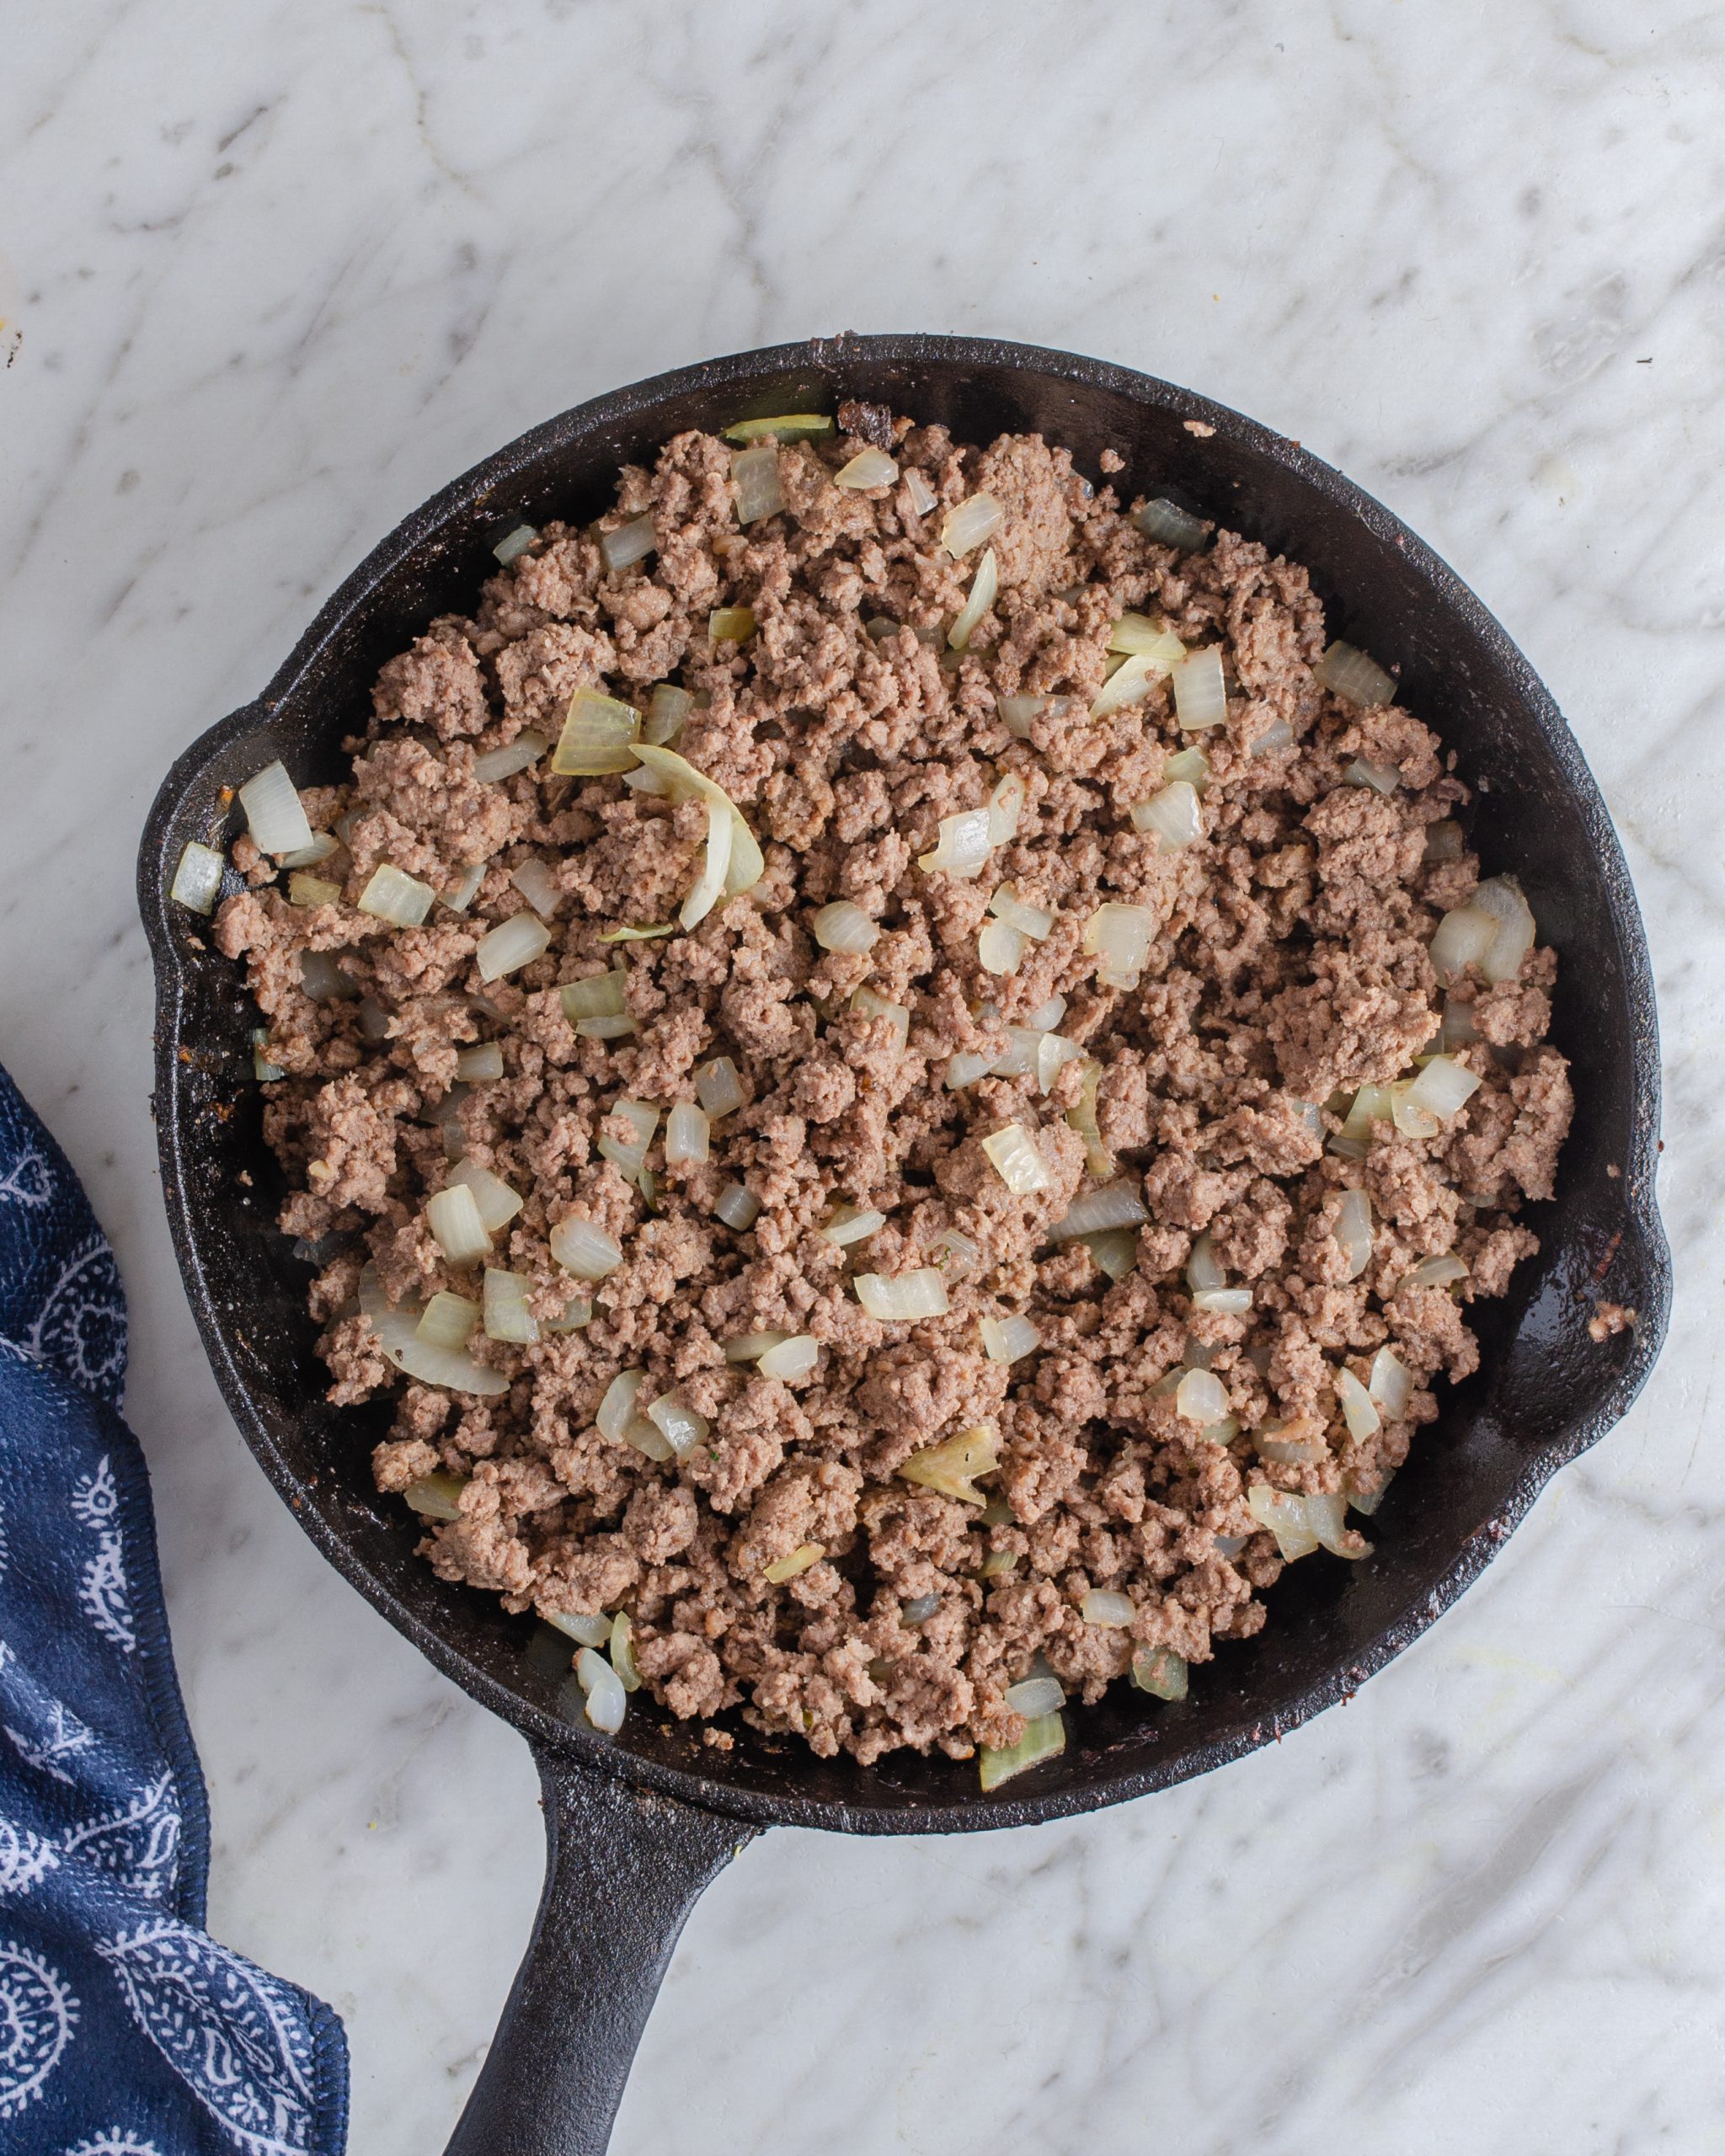 Place the ground beef into a skillet over medium-high heat, and saute until browned completely. Drain any excess grease. 